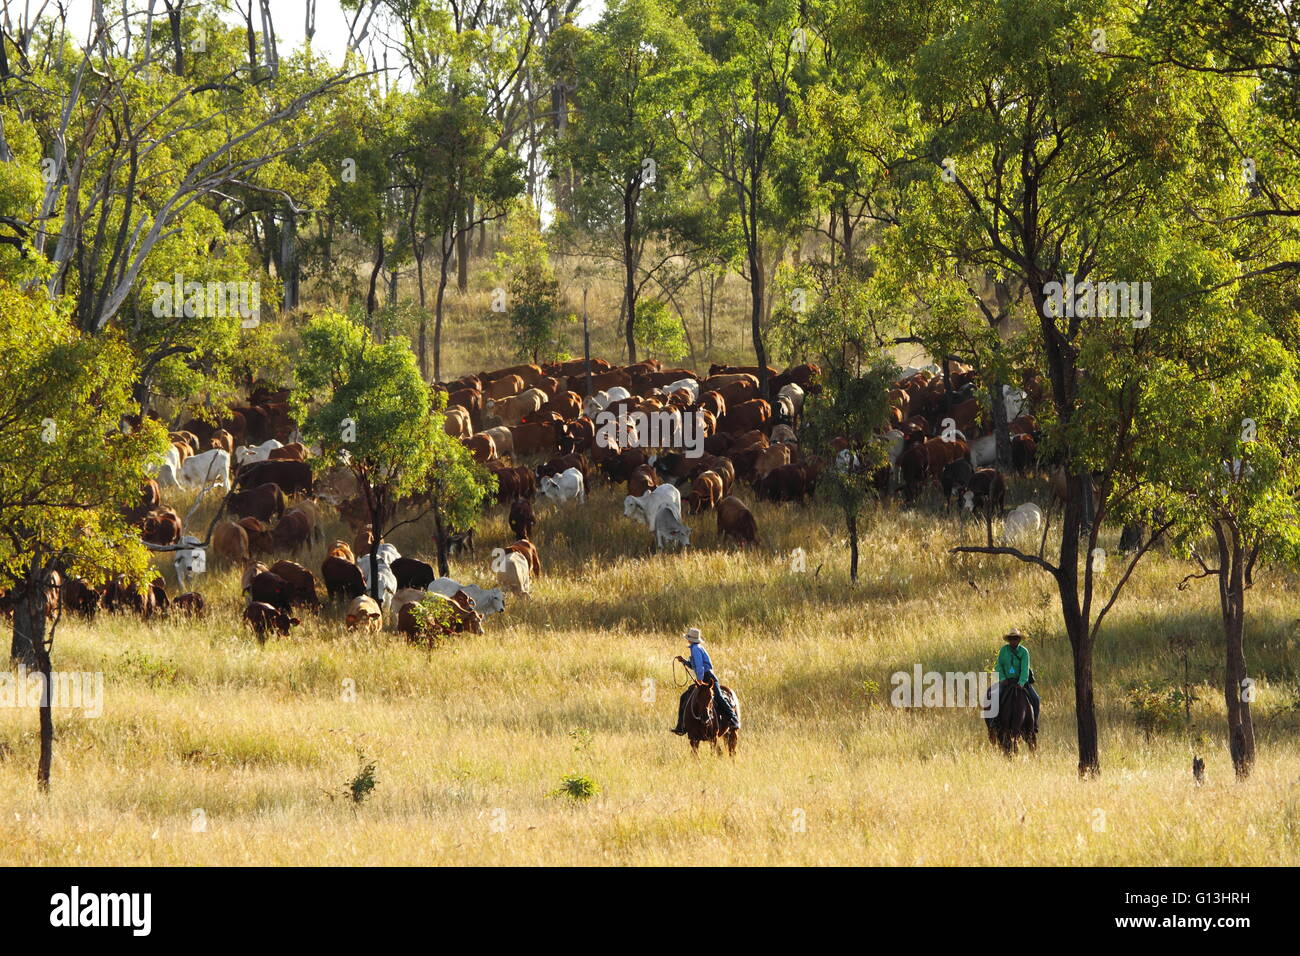 Two drovers guide a cattle mob on 'Eidsvold Station' near Eidsvold, Queensland, Australia during a cattle drive. Stock Photo